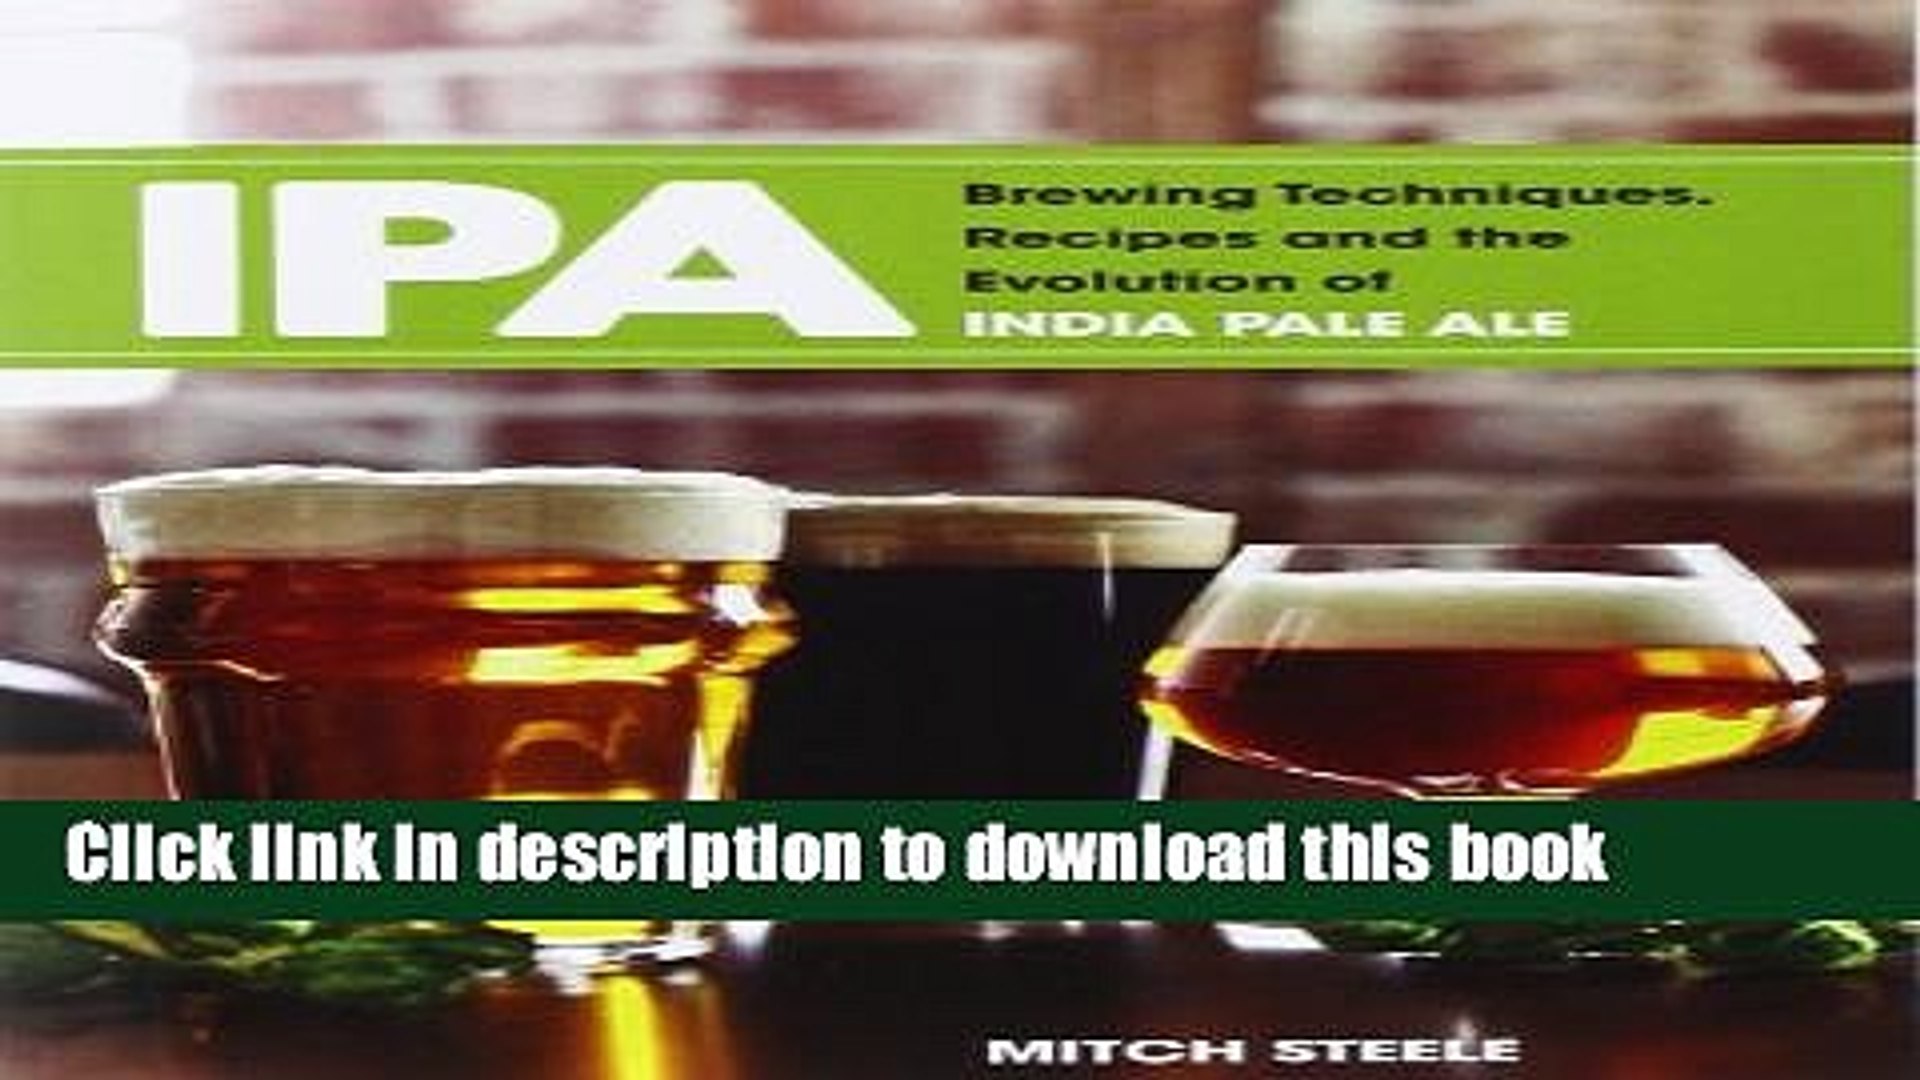 [Popular] IPA: Brewing Techniques, Recipes and the Evolution of India Pale Ale Hardcover Free